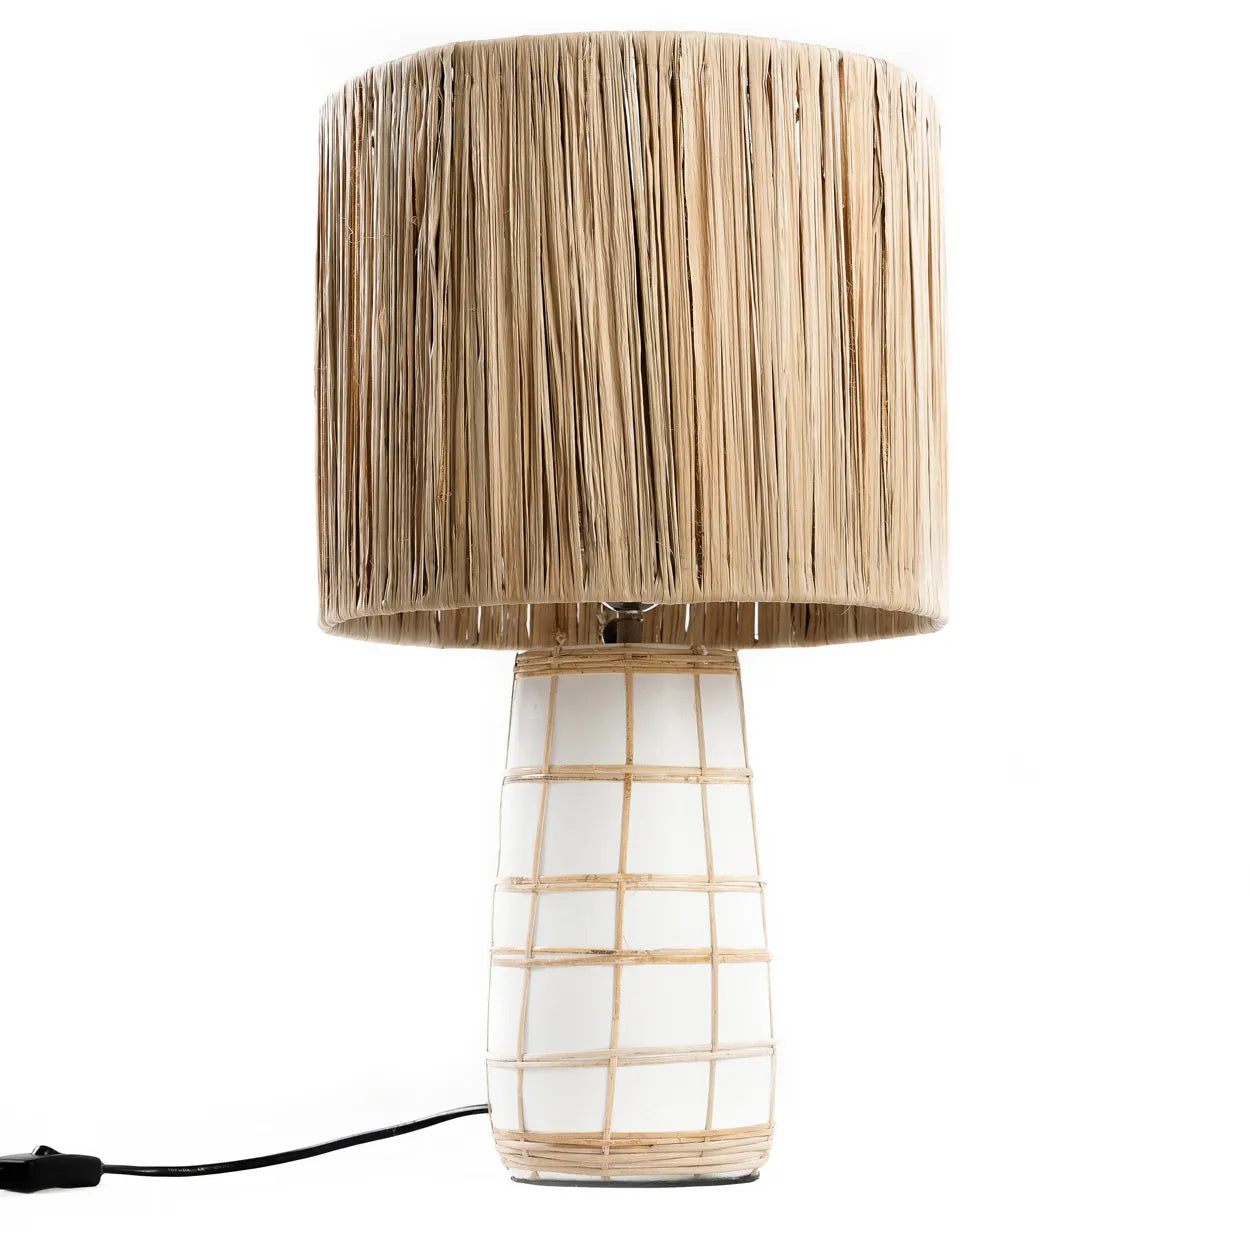 Vejer Grass Lamp - Terracotta and Rattan Table Lamp